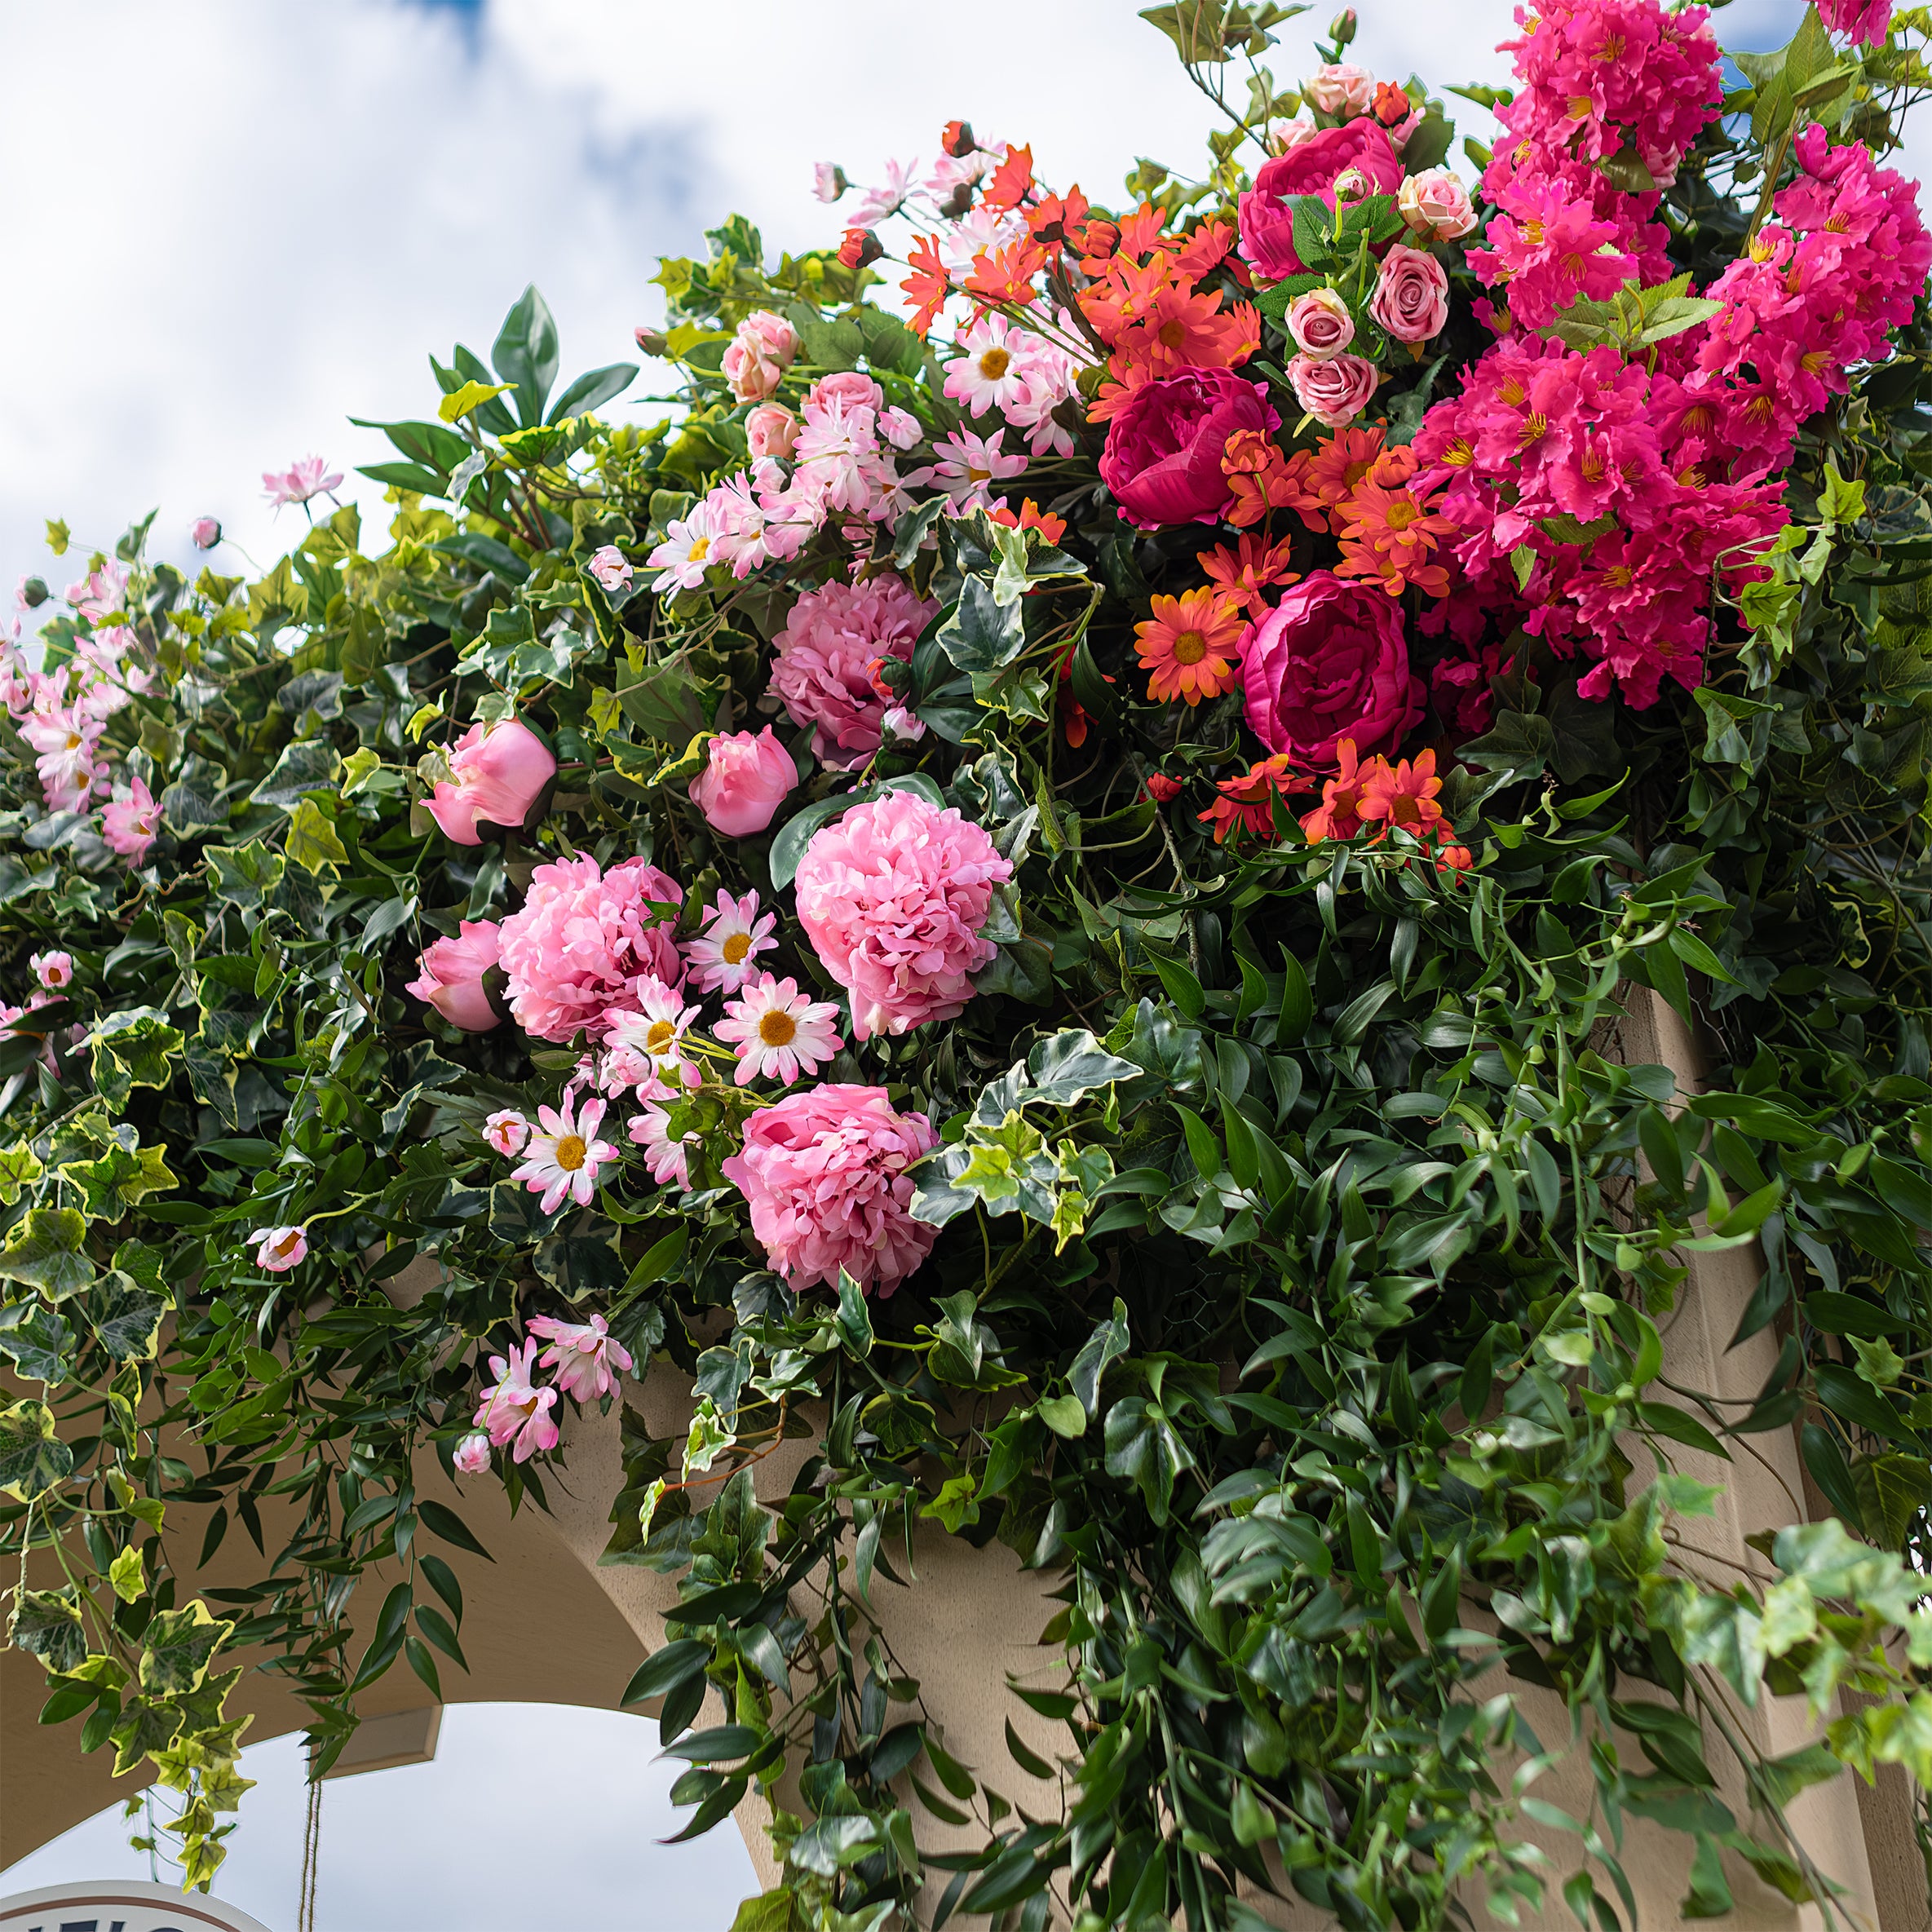 In this photo, the staircase of the Angelo Poretti event stand at Regent’s Park Taste Festival is decorated with trailing ivy and vibrant floral arrangements in pink, orange, and white by Florist Amaranté London. The floral design beautifully complements the beige stucco structure, enhancing the Mediterranean feel.